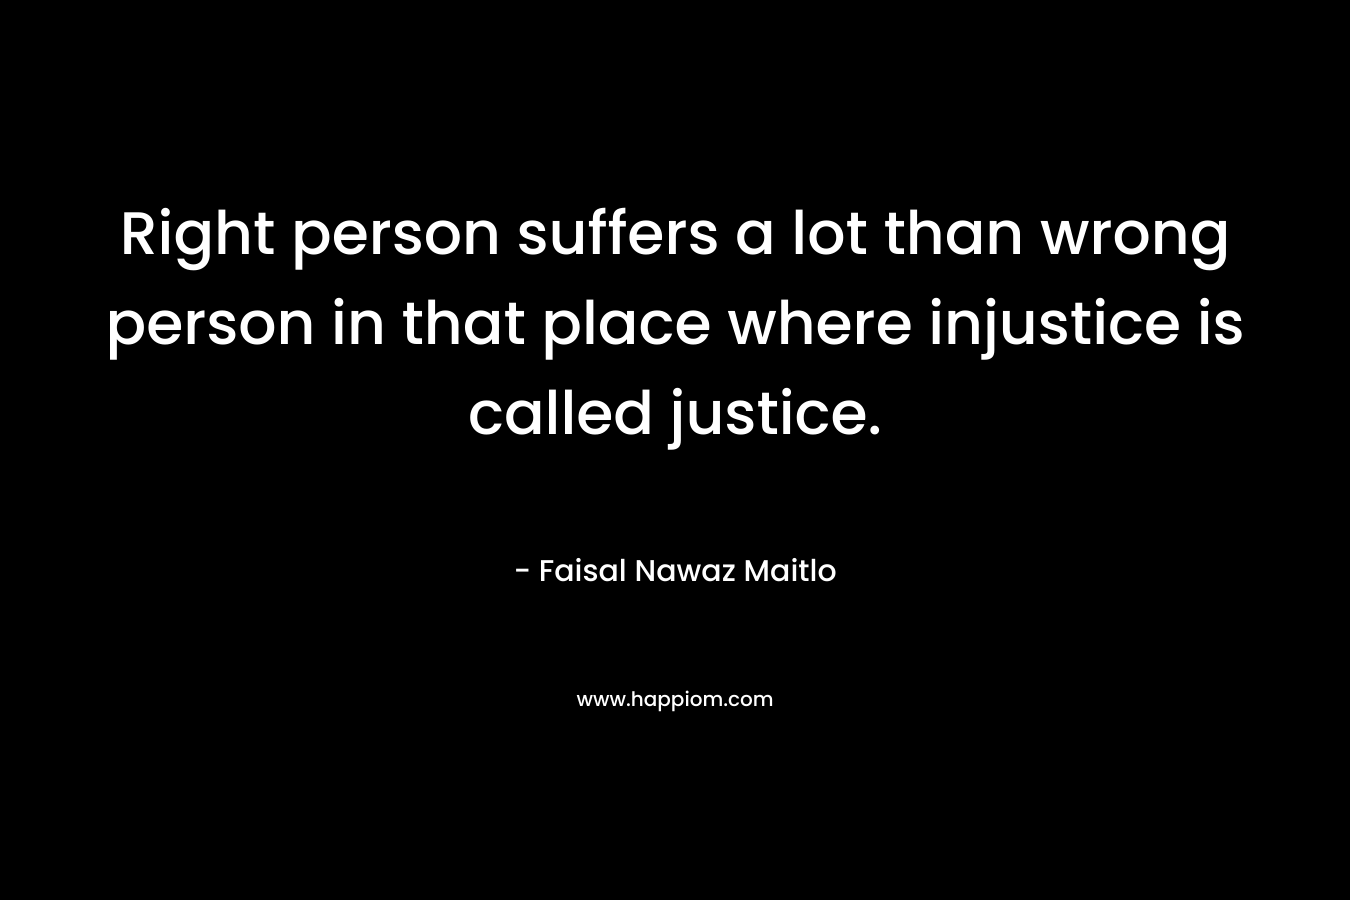 Right person suffers a lot than wrong person in that place where injustice is called justice.